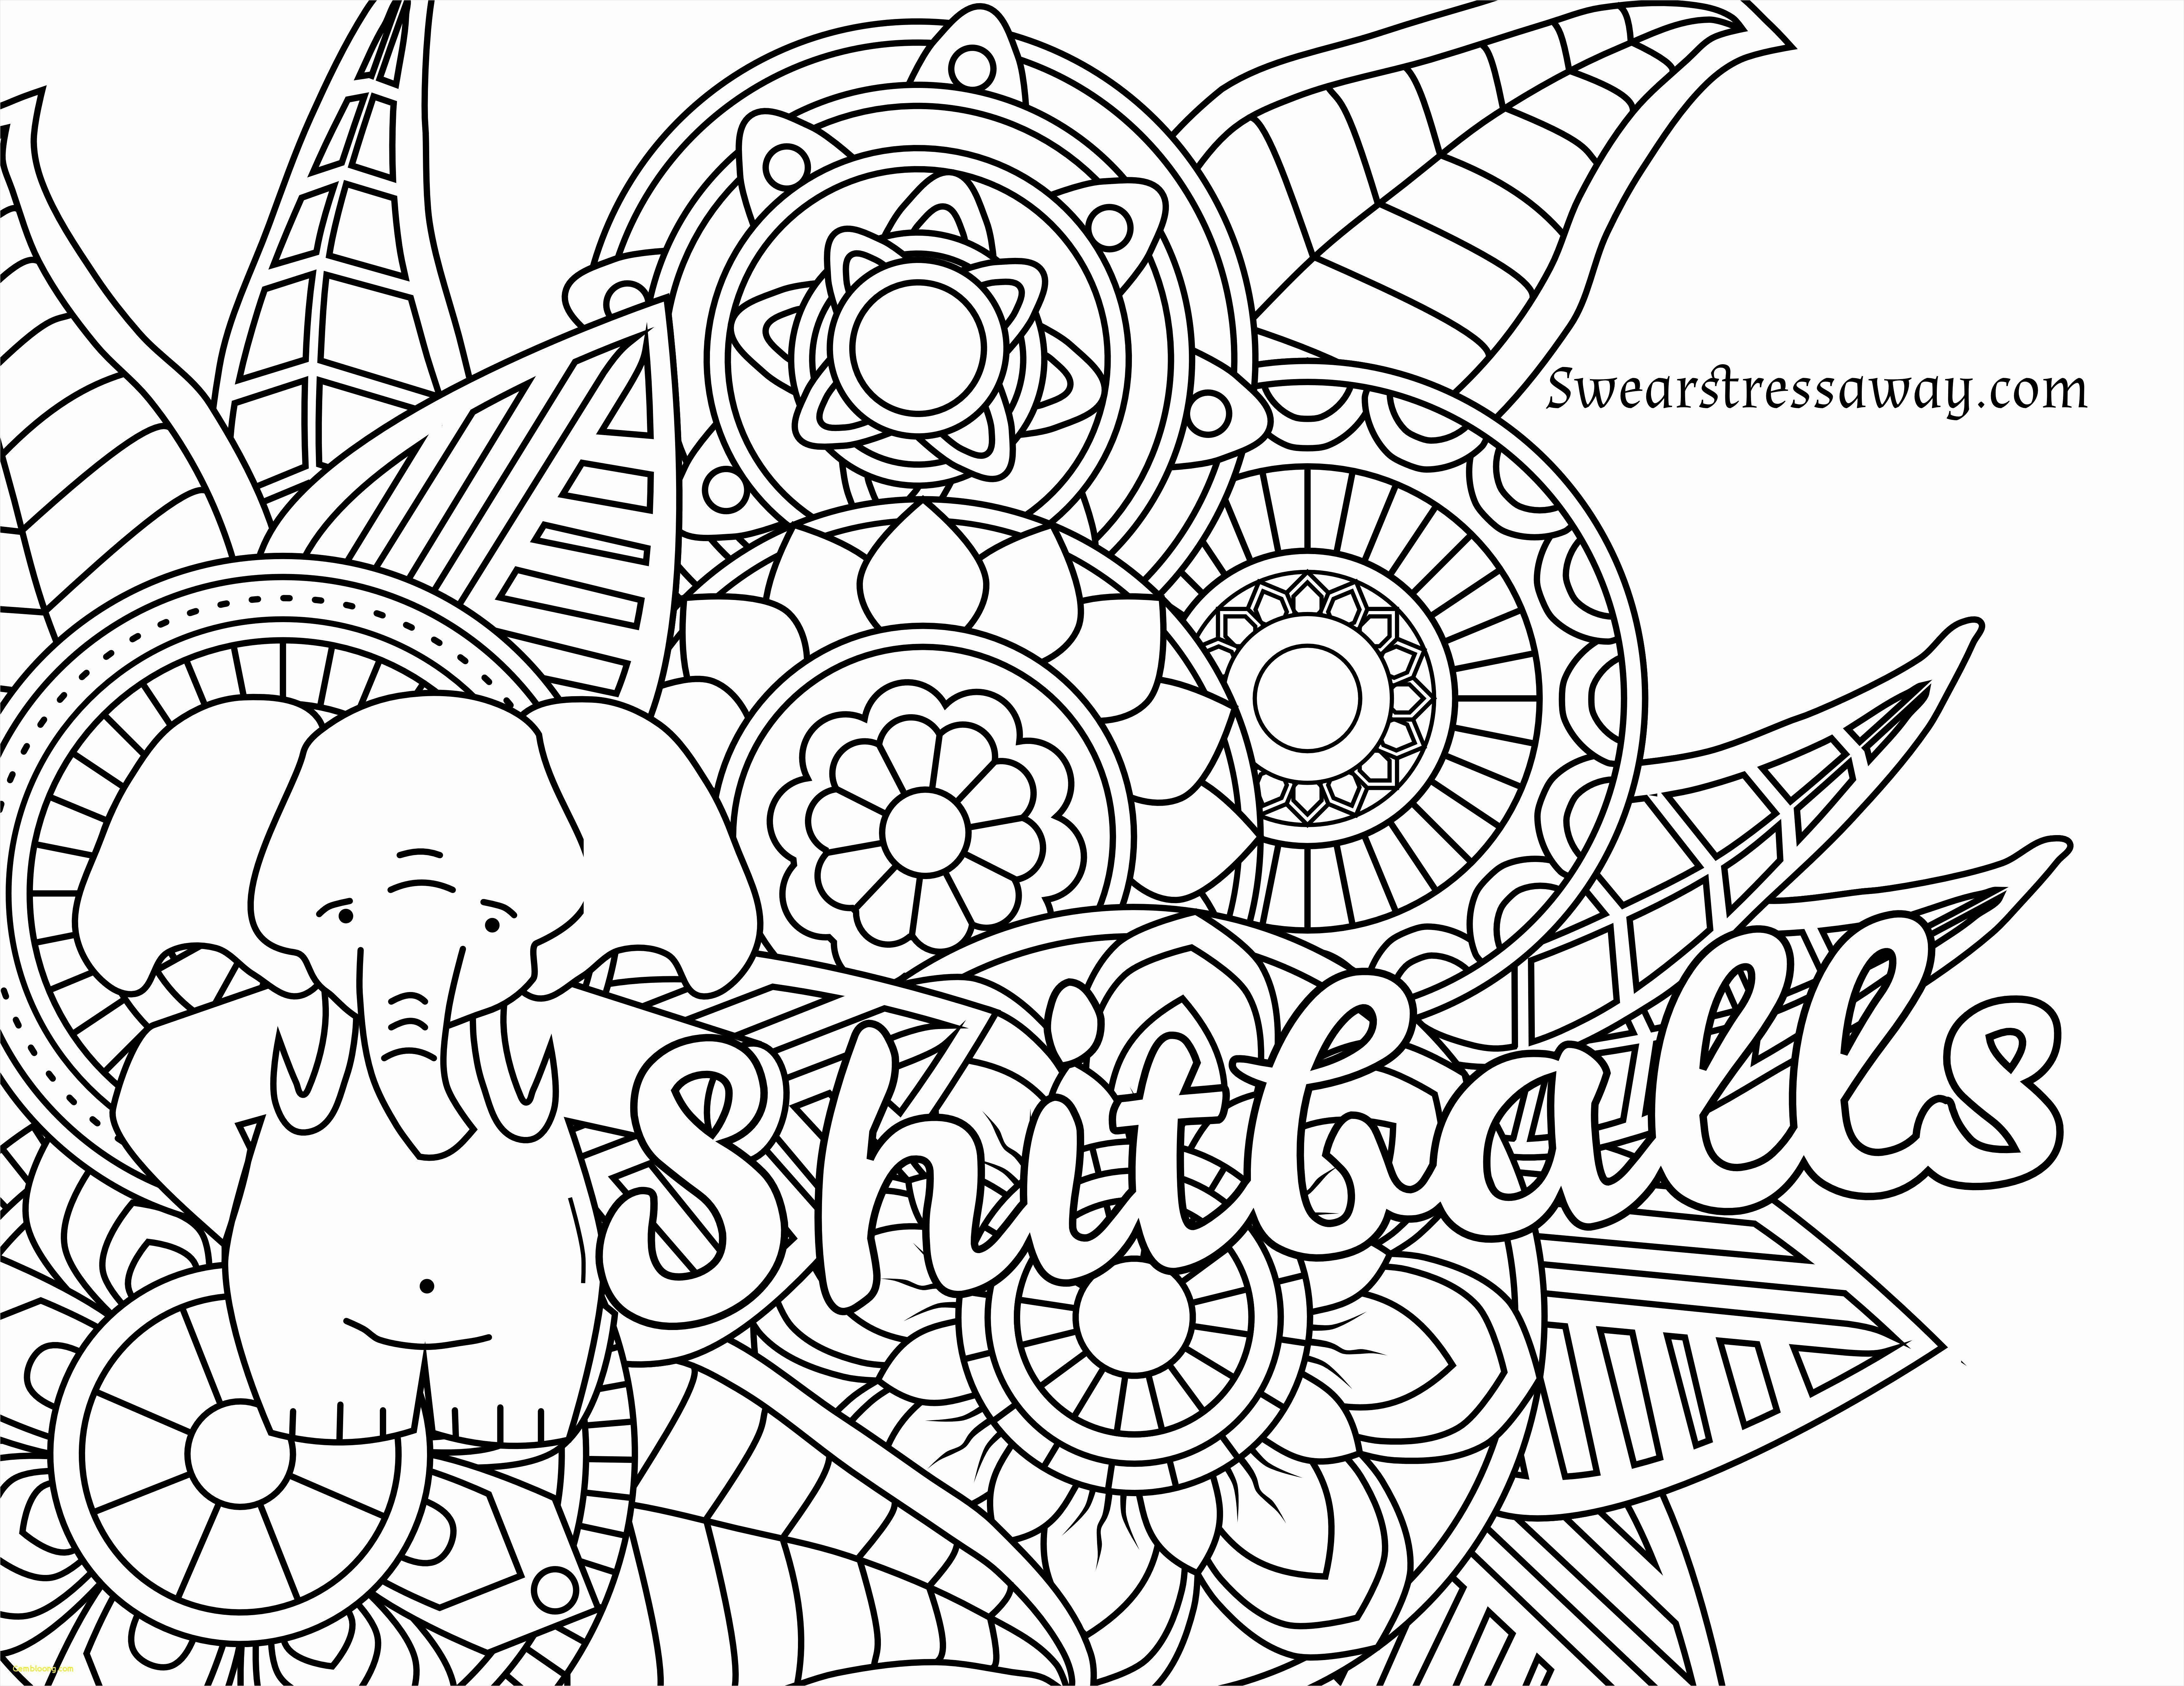 New Adult Coloring Pages Swear Words | Jvzooreview - Swear Word Coloring Pages Printable Free